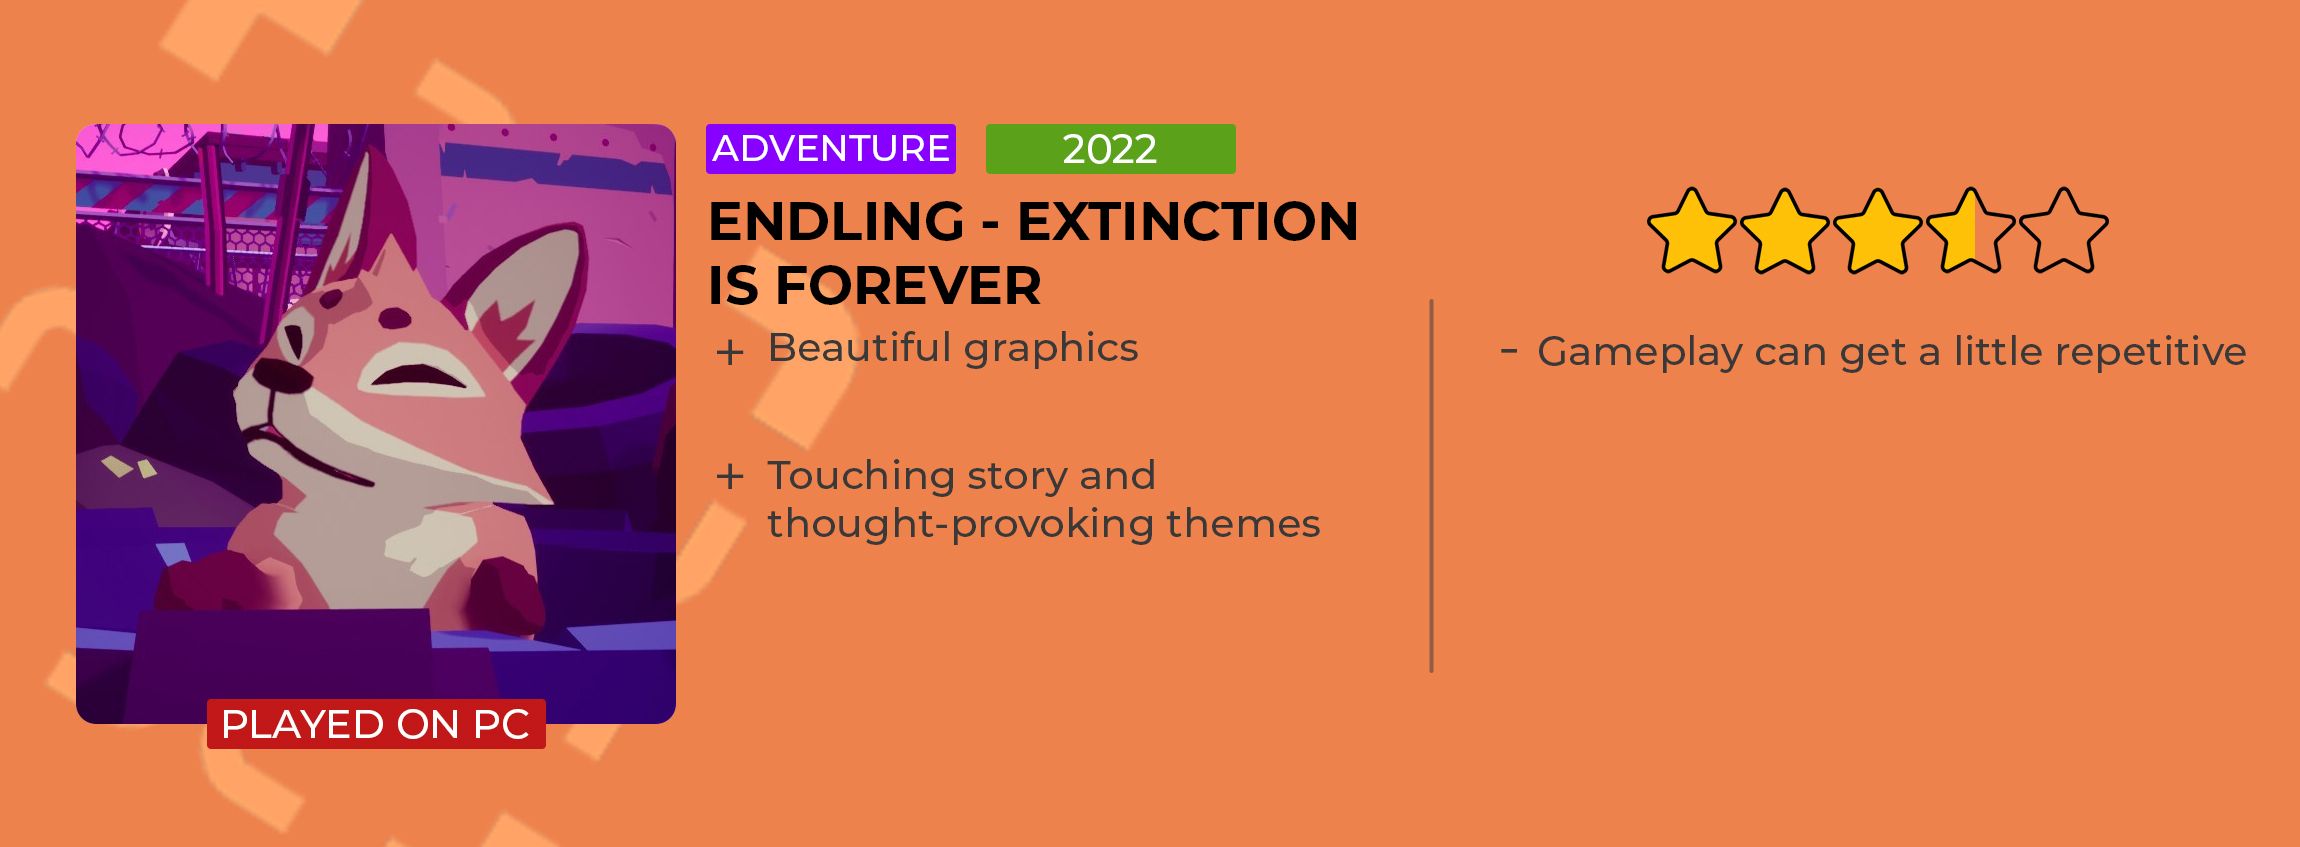 endling extinction is forever review download free